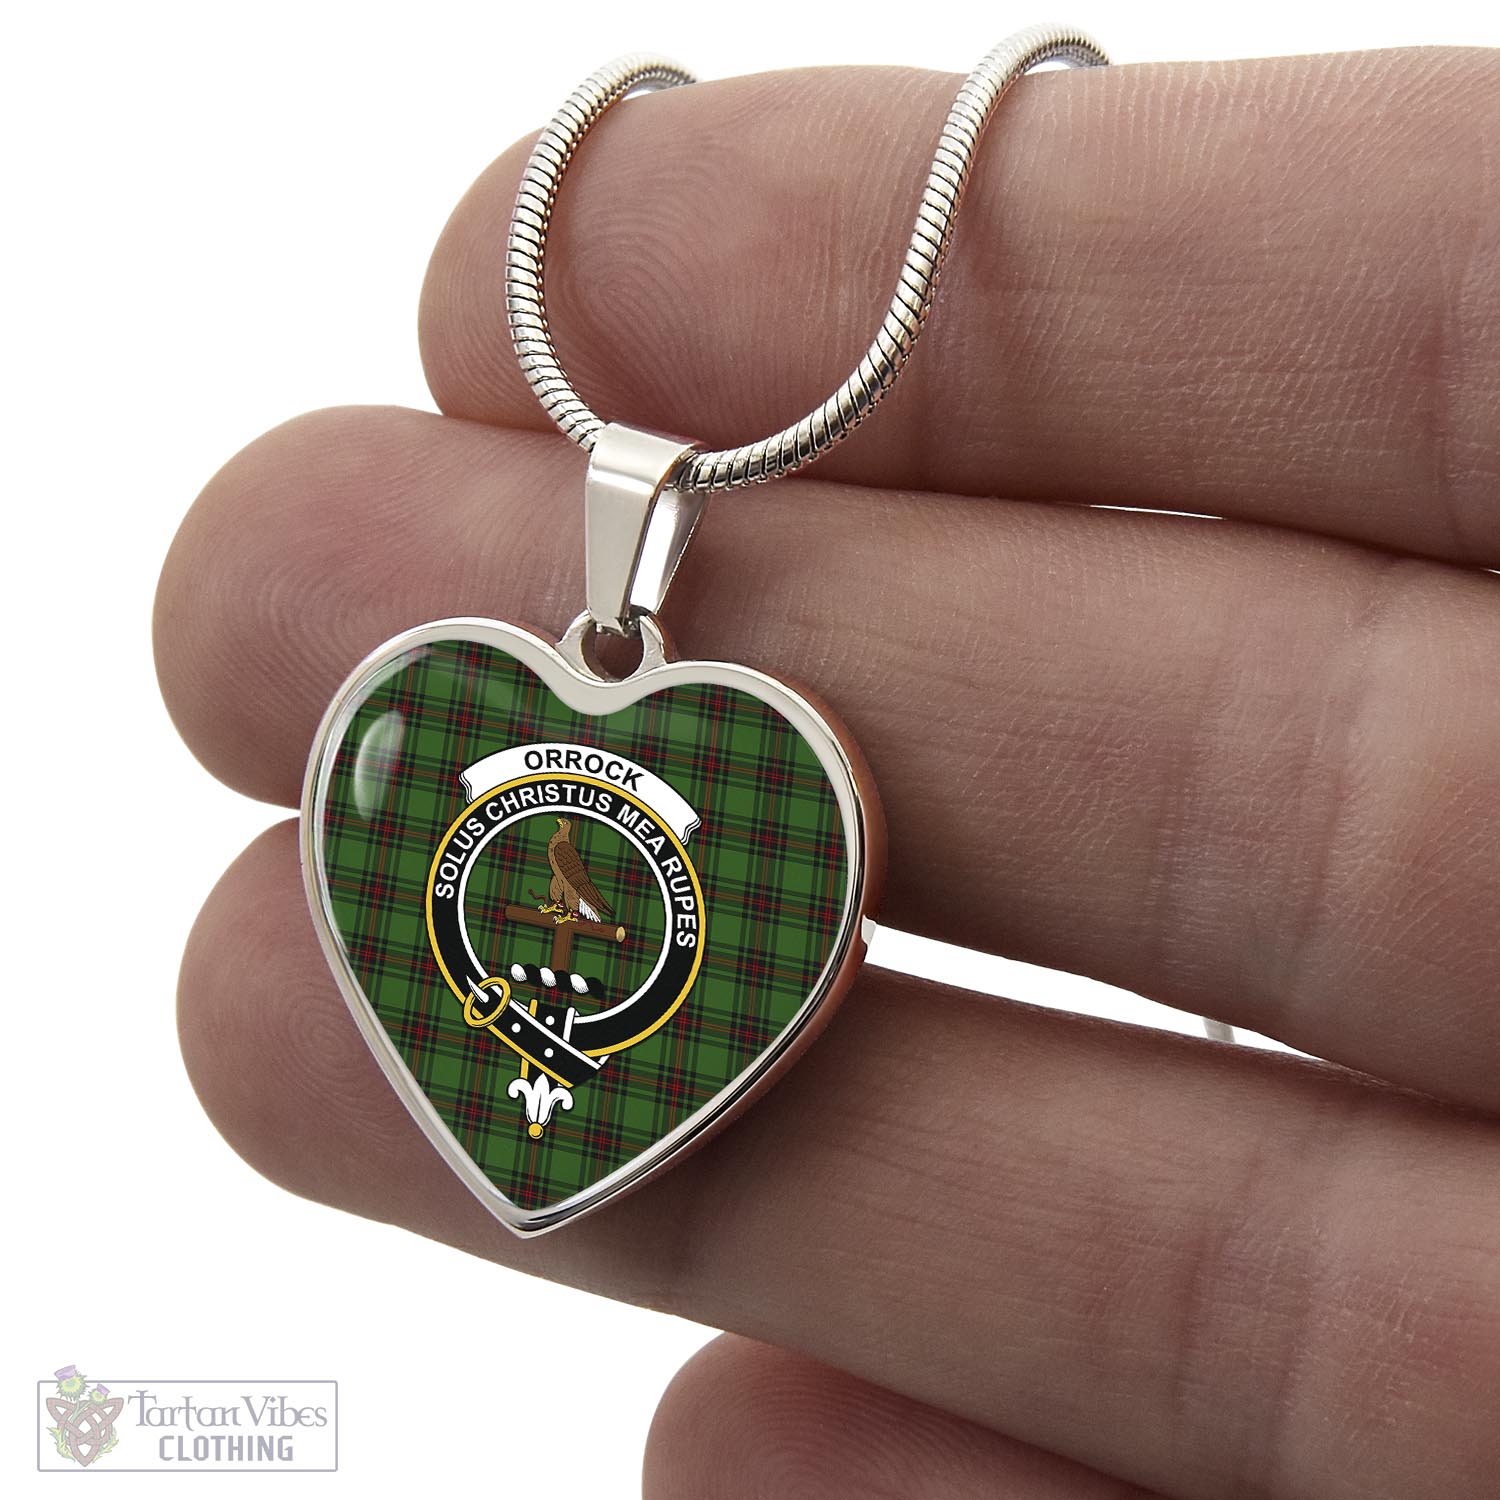 Tartan Vibes Clothing Orrock Tartan Heart Necklace with Family Crest